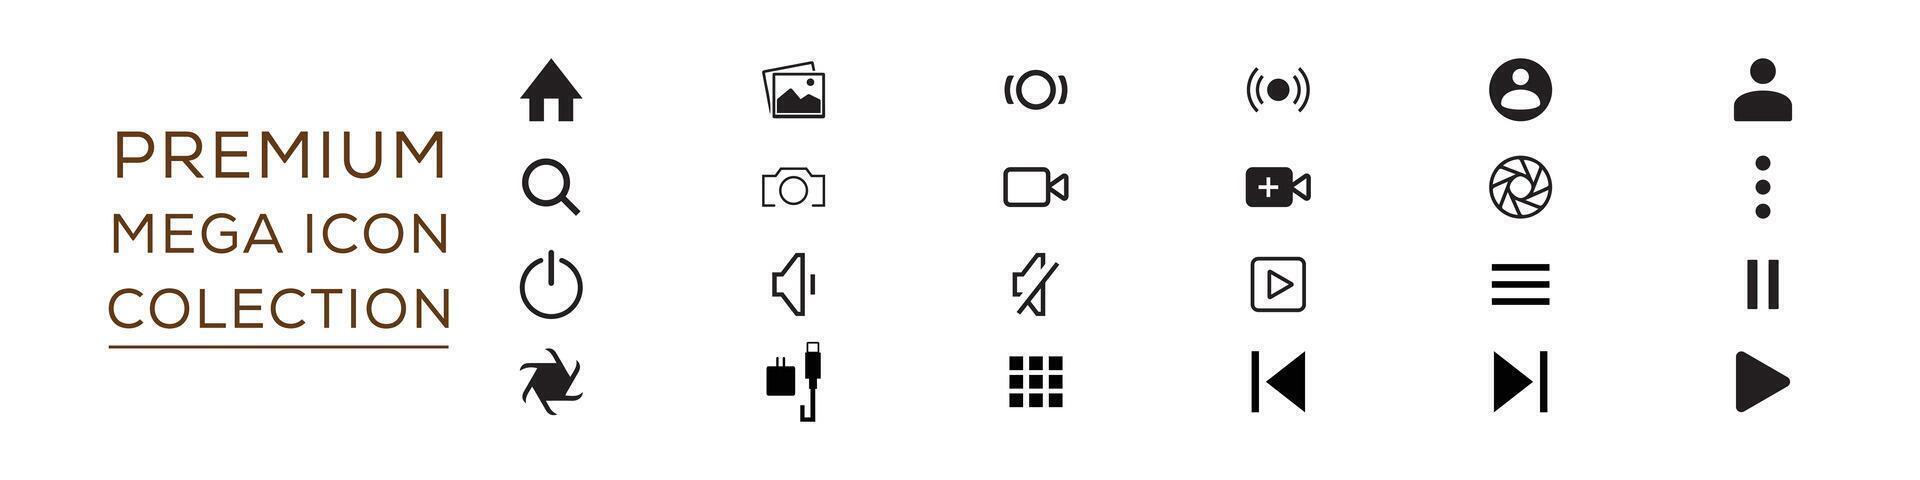 Premium Mega set of icons in the trendy line style. Business, e-commerce, finance, accounting. Vector illustration.